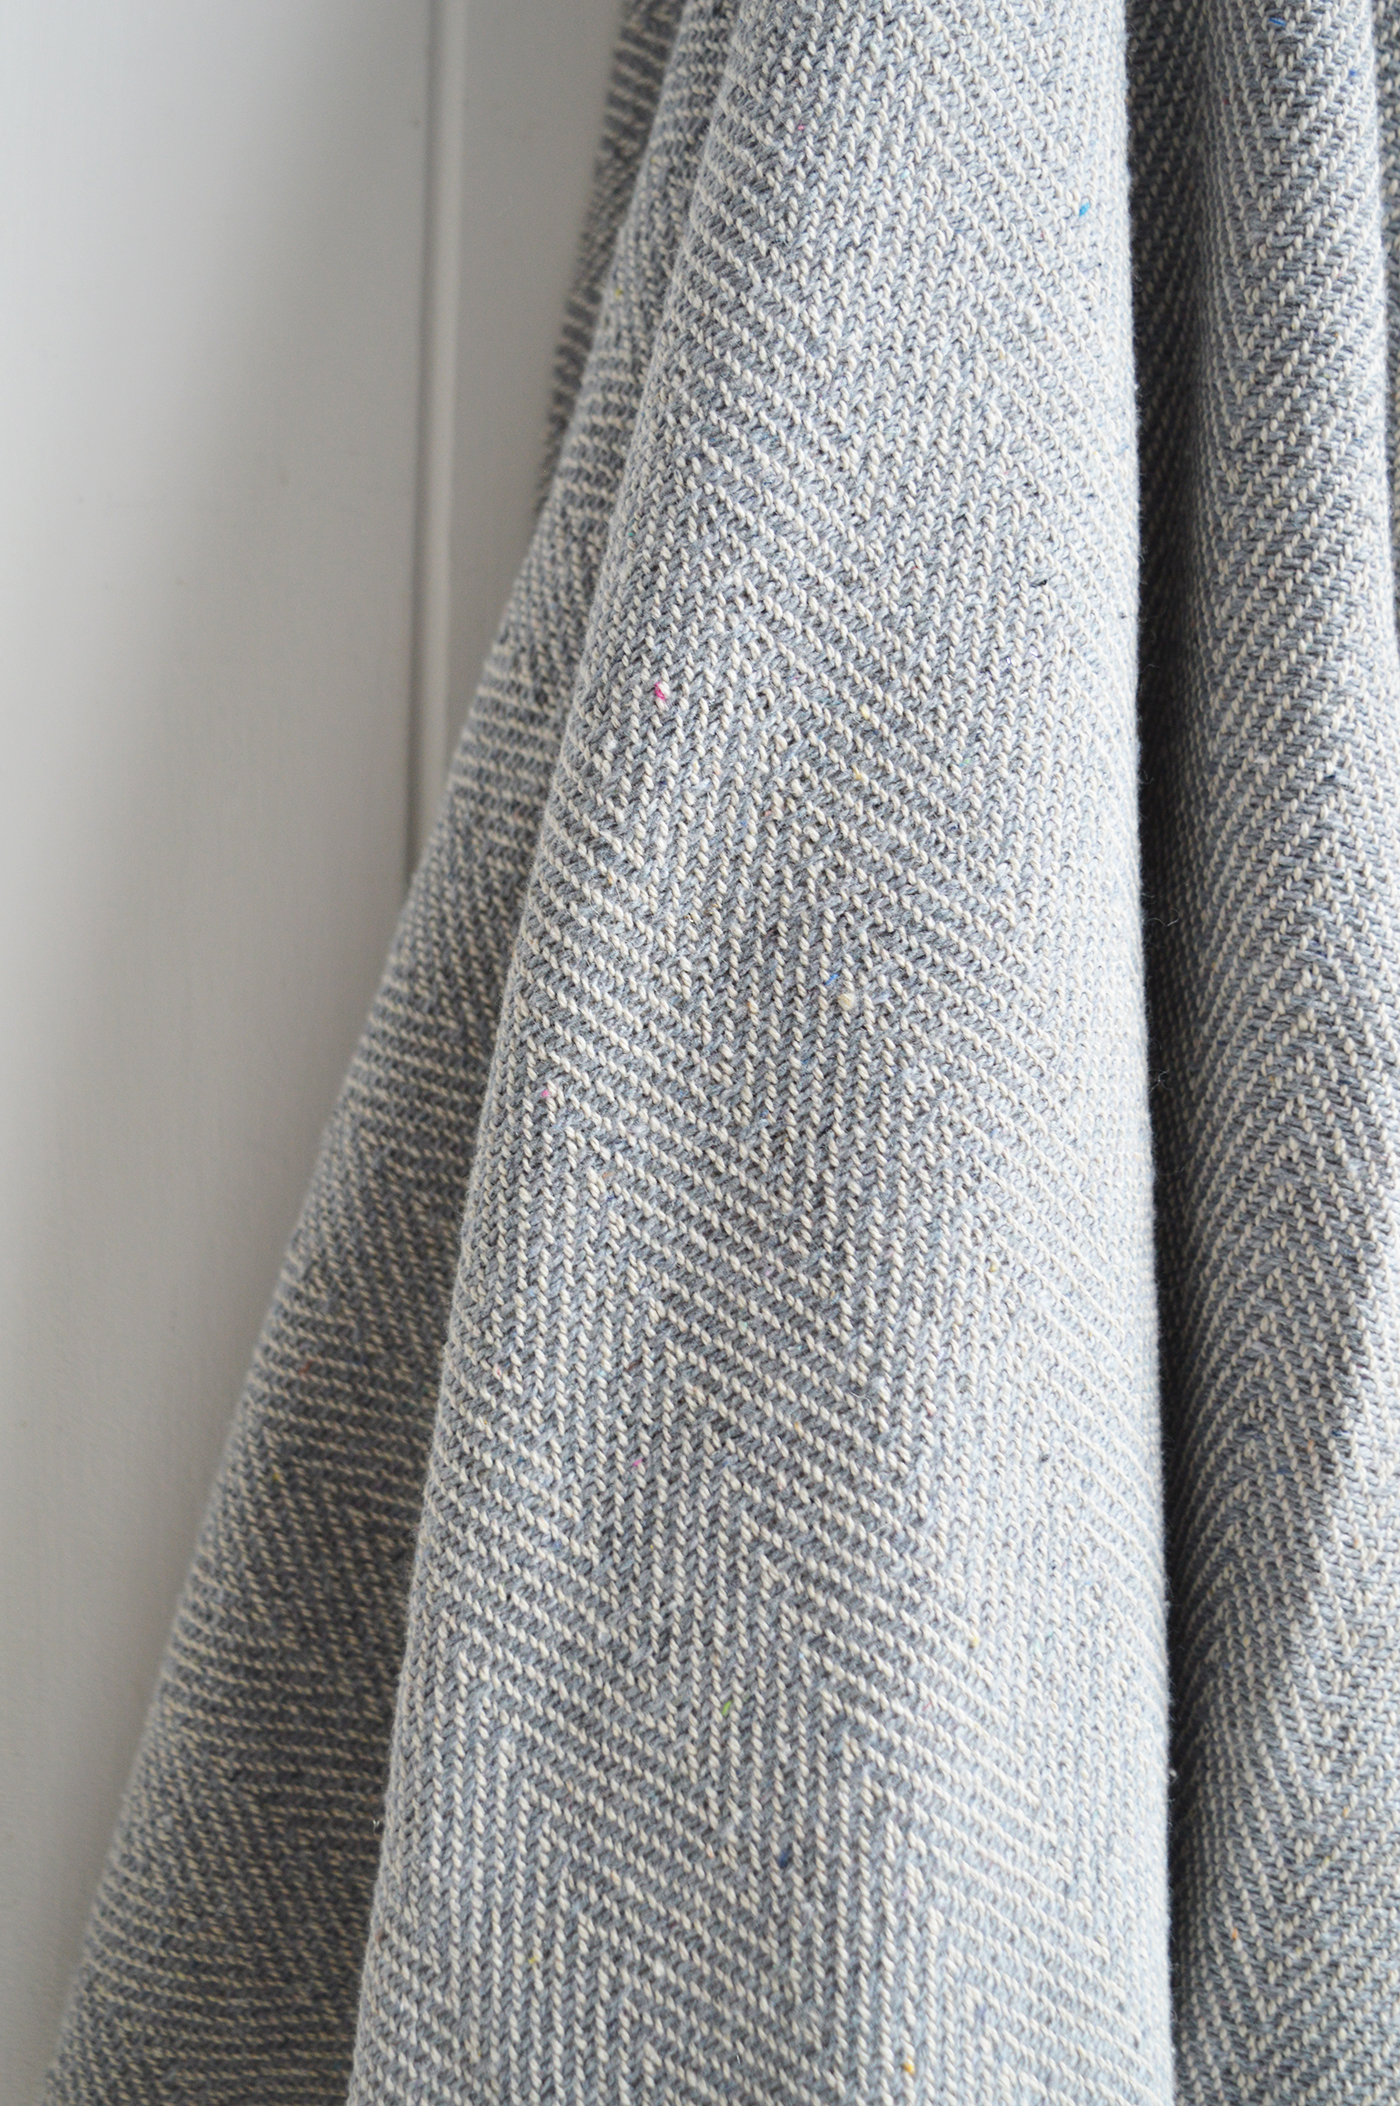 Stowe throws in blues, greys and natural coloures  for interiors in New England styles modern farmhouse, country, coastal and city homes from The White Lighthouse. Furniture and home interiors UK - Pale Grey Herringbone Throw